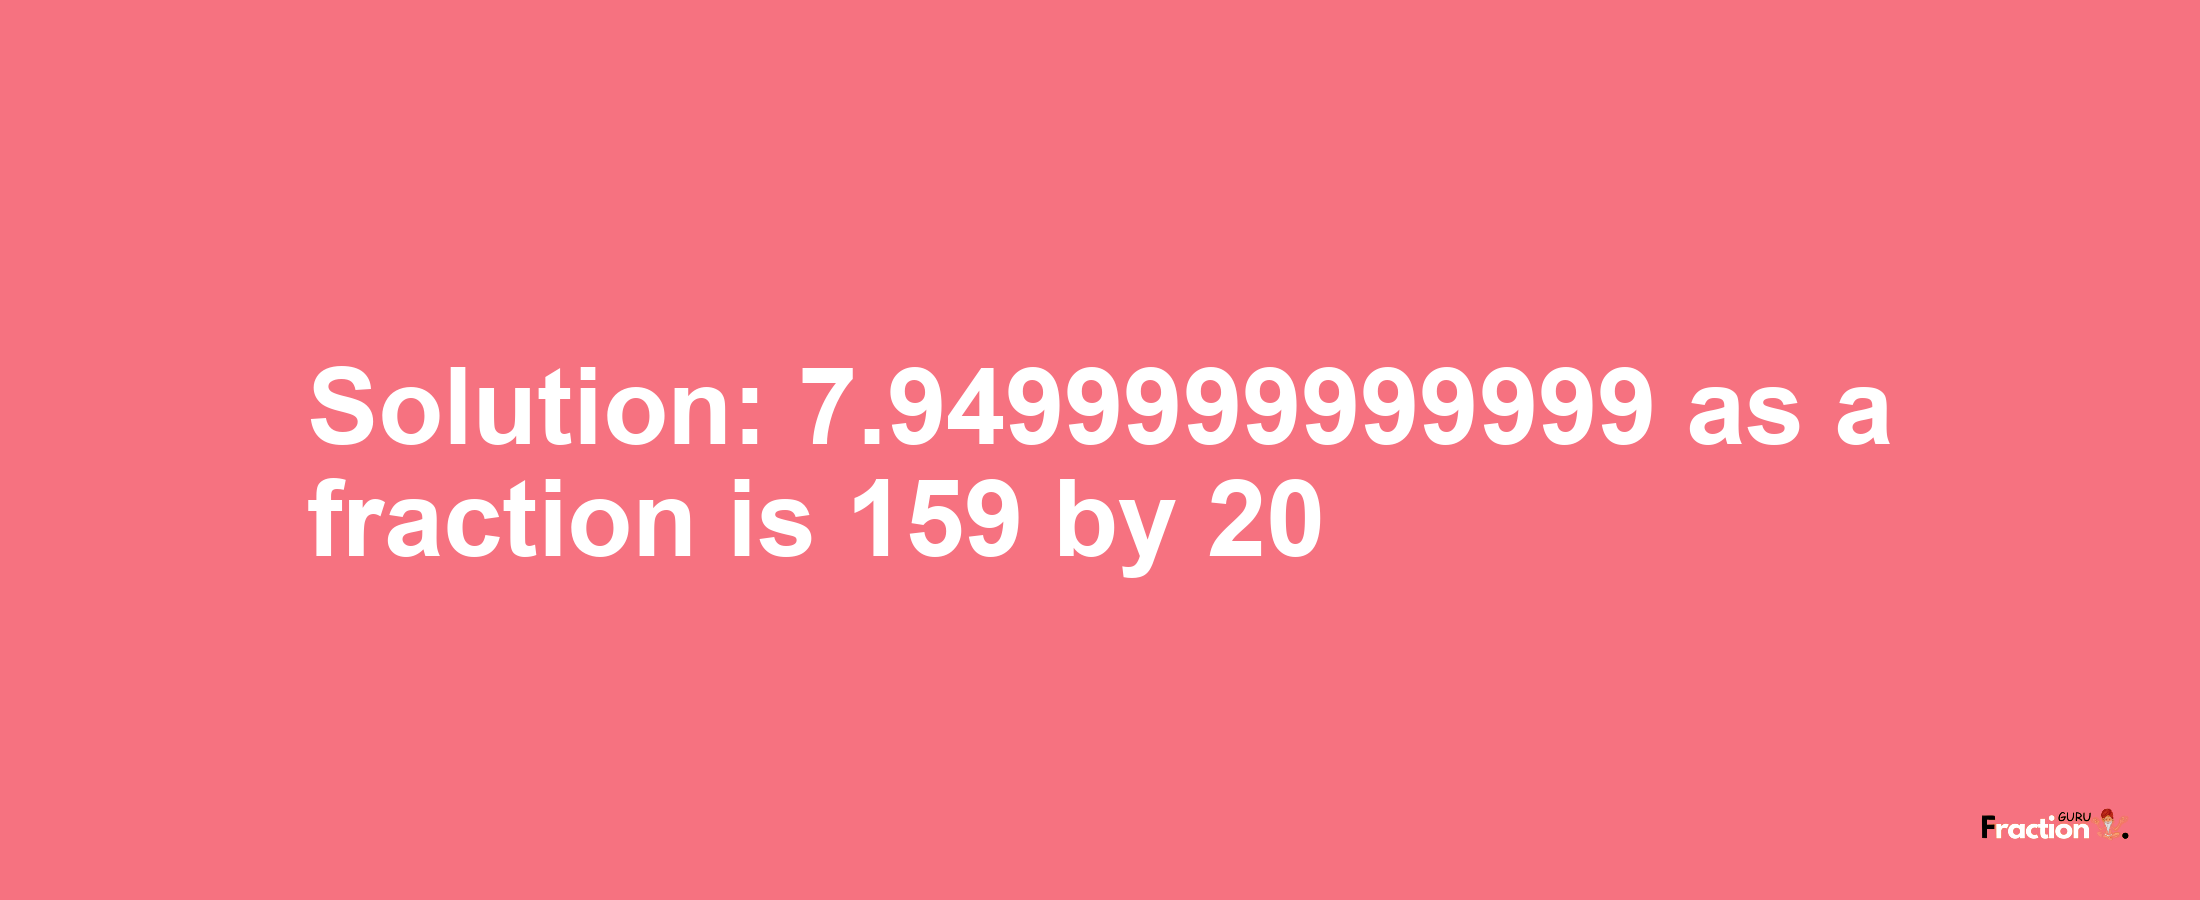 Solution:7.9499999999999 as a fraction is 159/20